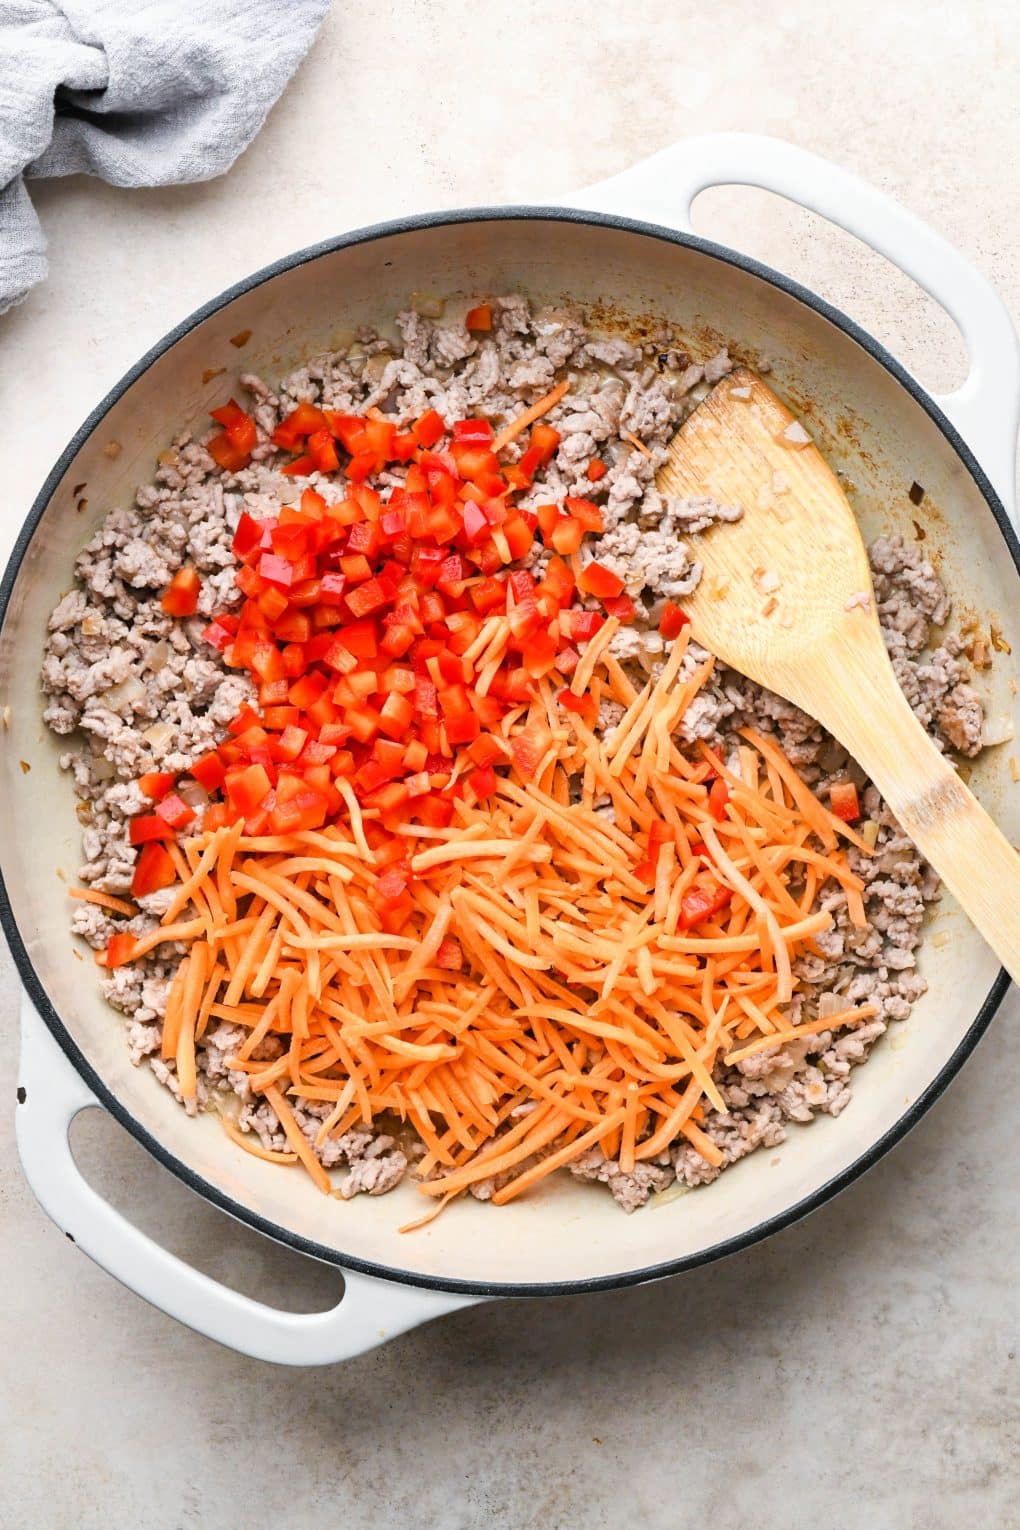 How to make Pork Lettuce Wraps: Shredded carrot and diced bell pepper added to skillet with cooked ground pork and shallots.